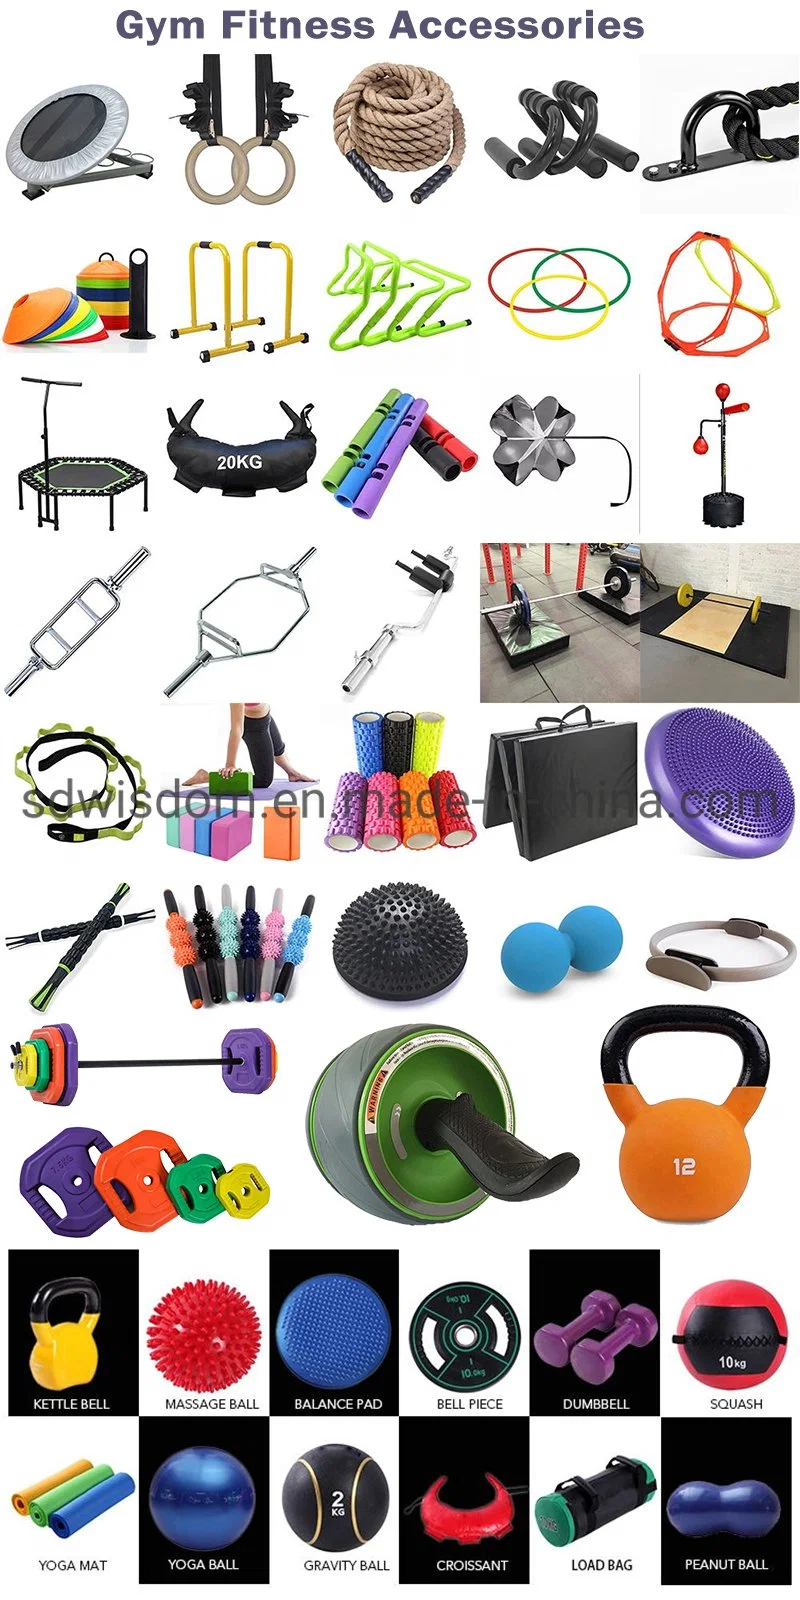 Gym Fitness Equipment Free Weight Fixed Electroplating Hard Chrome Weightlifting Dumbbell for Gym Exercise Home